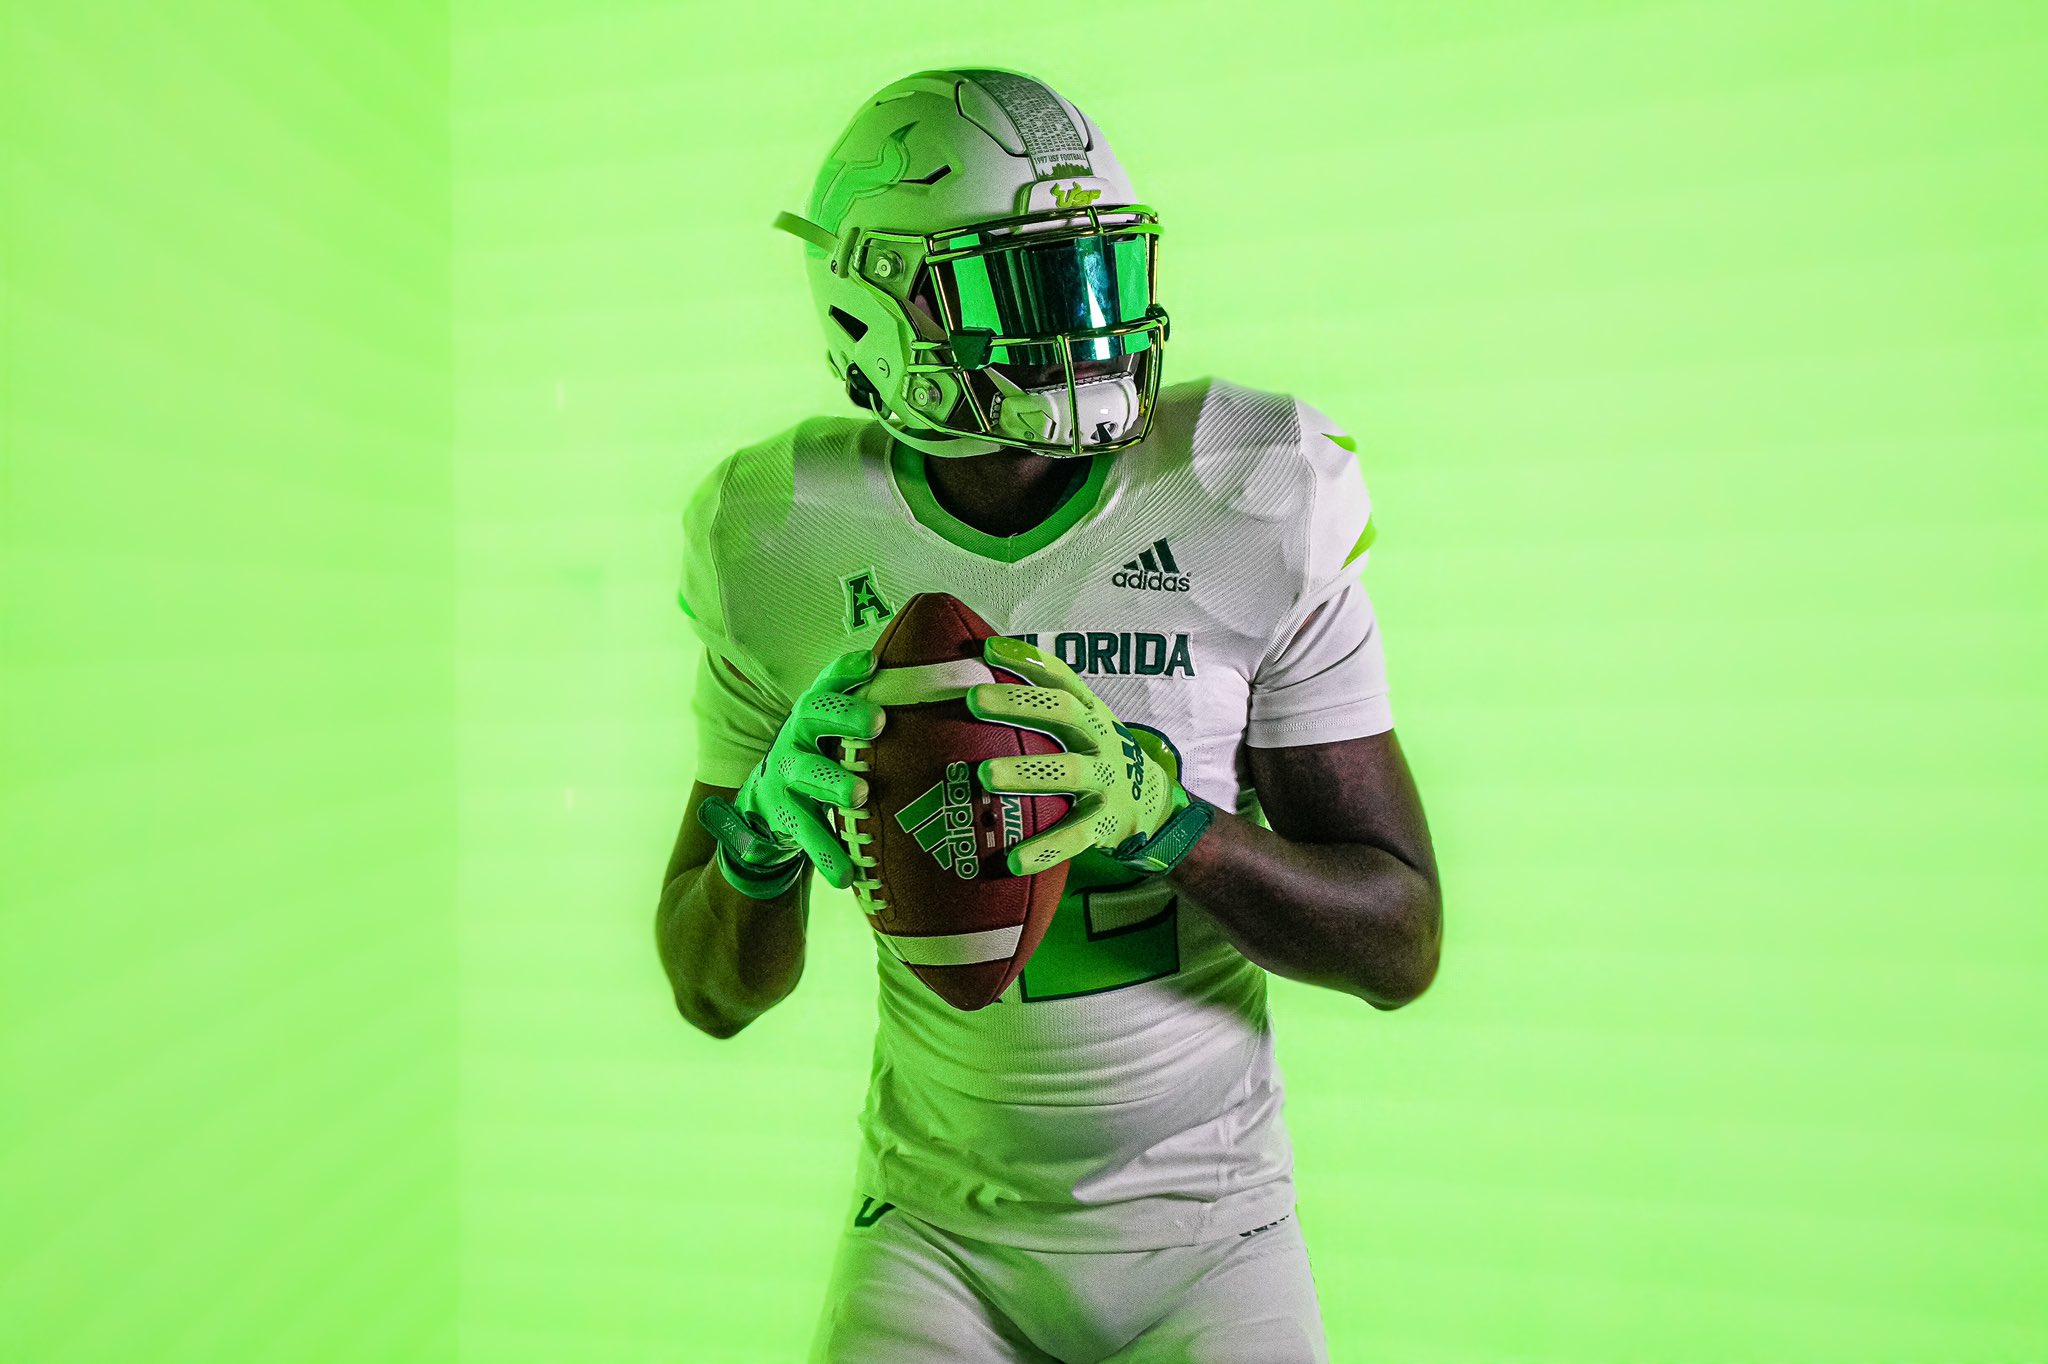 USF Football - Dare I say it… best slime yet? 🤷‍♂️